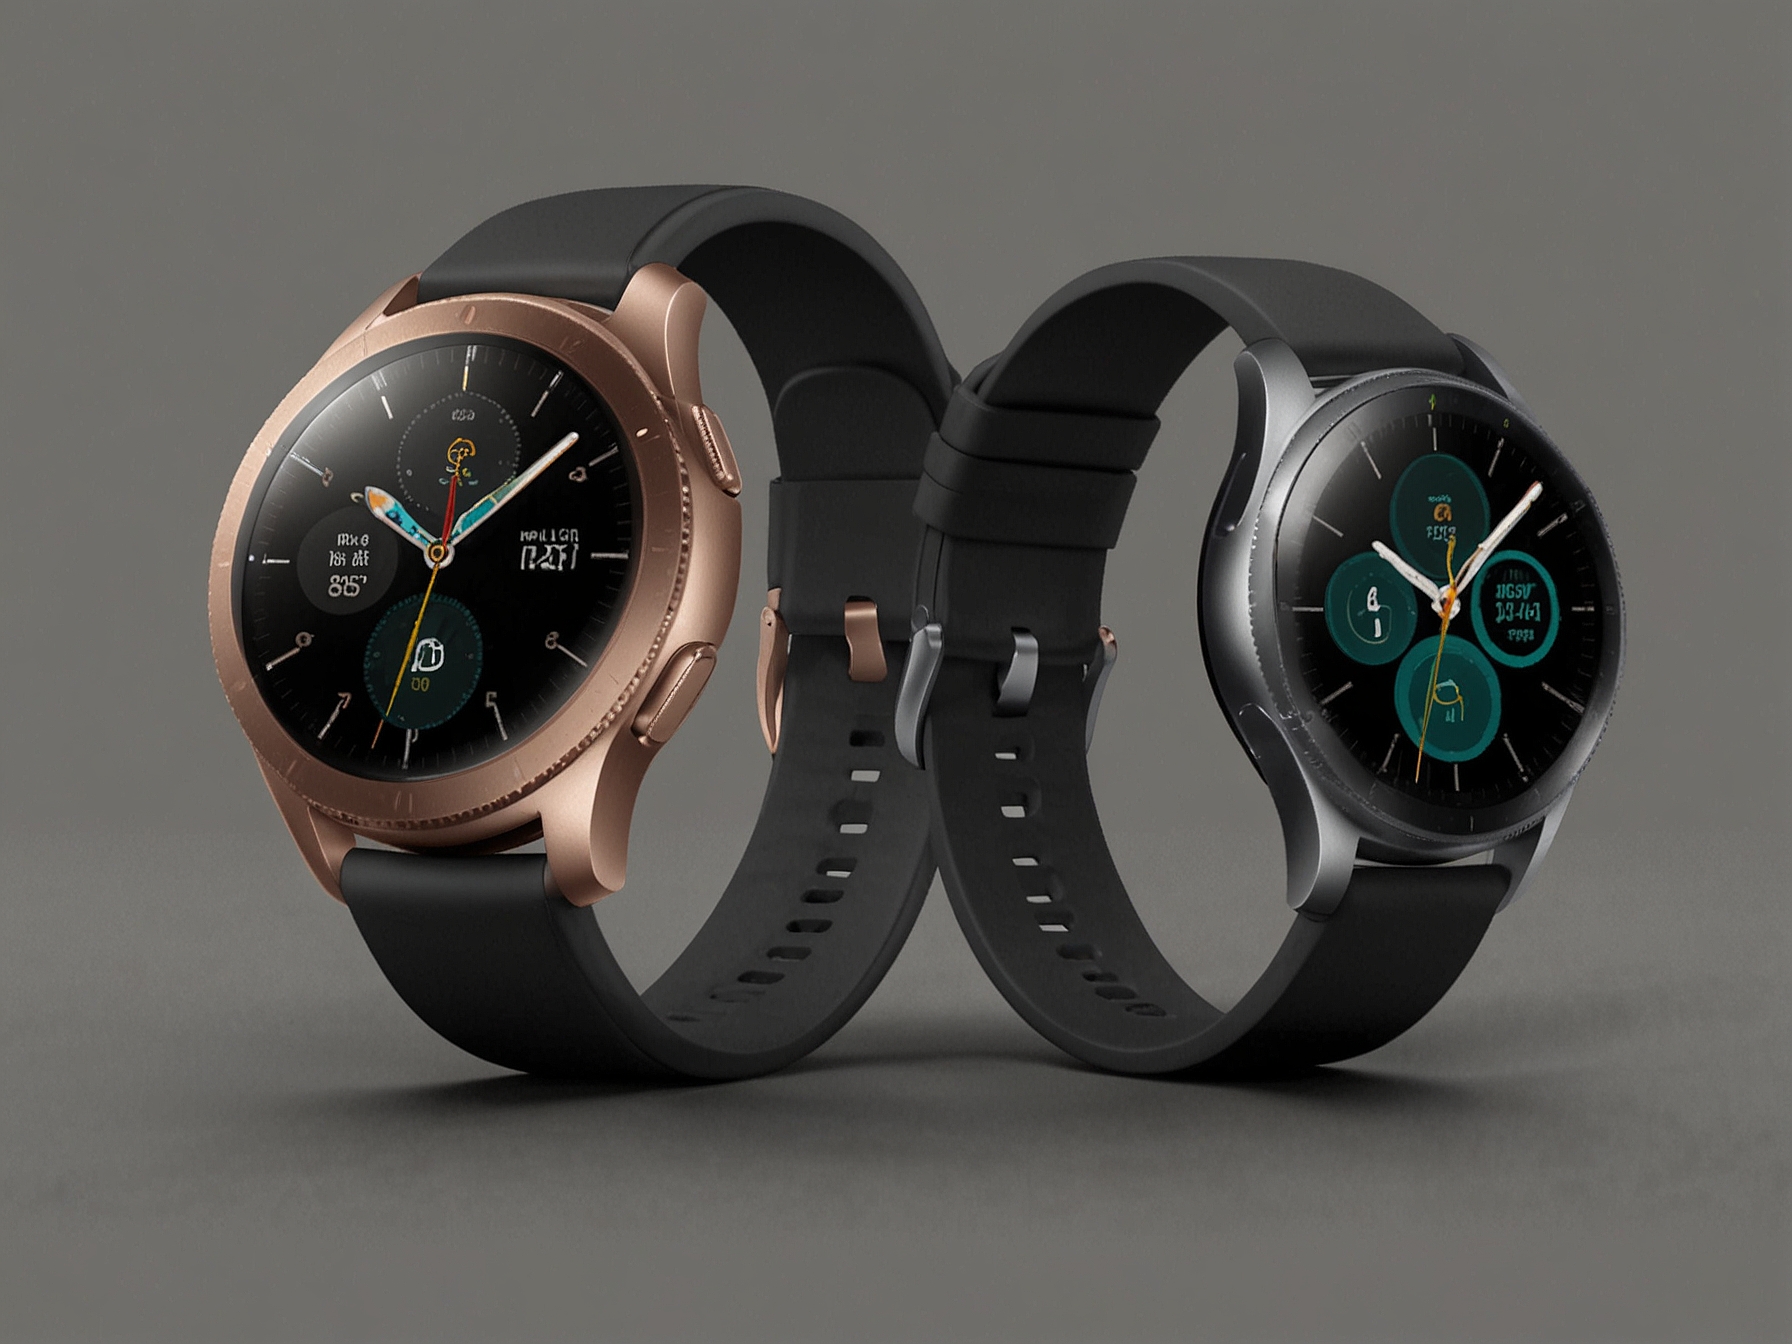 An image showcasing the new Galaxy Watch 7 with its sleek, modern design and interchangeable bands. The display highlights improved performance metrics made possible by the advanced 3nm chip.